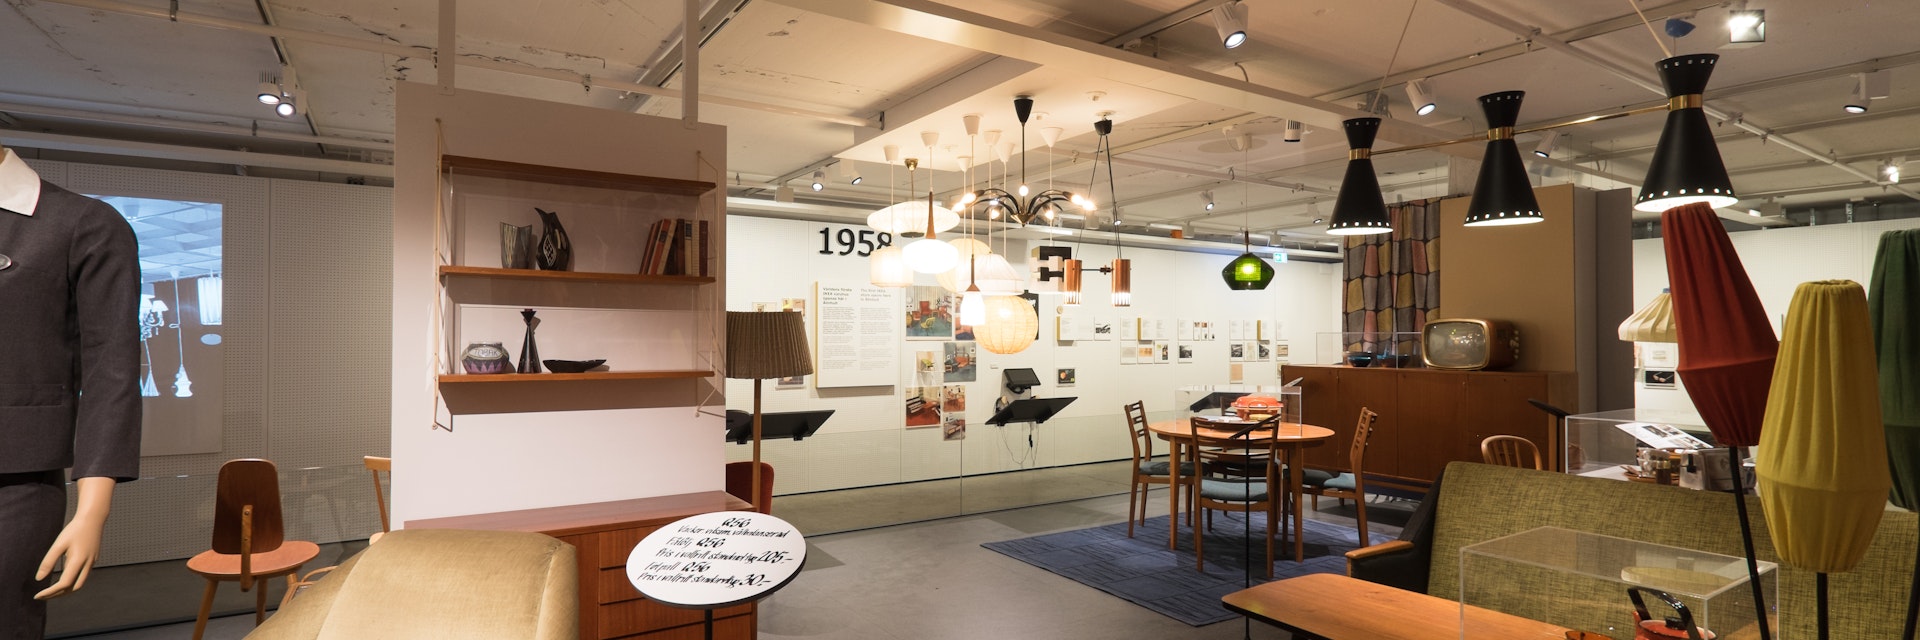 Interior of the IKEA Museum located in Almhult, Smaland in Sweden. 